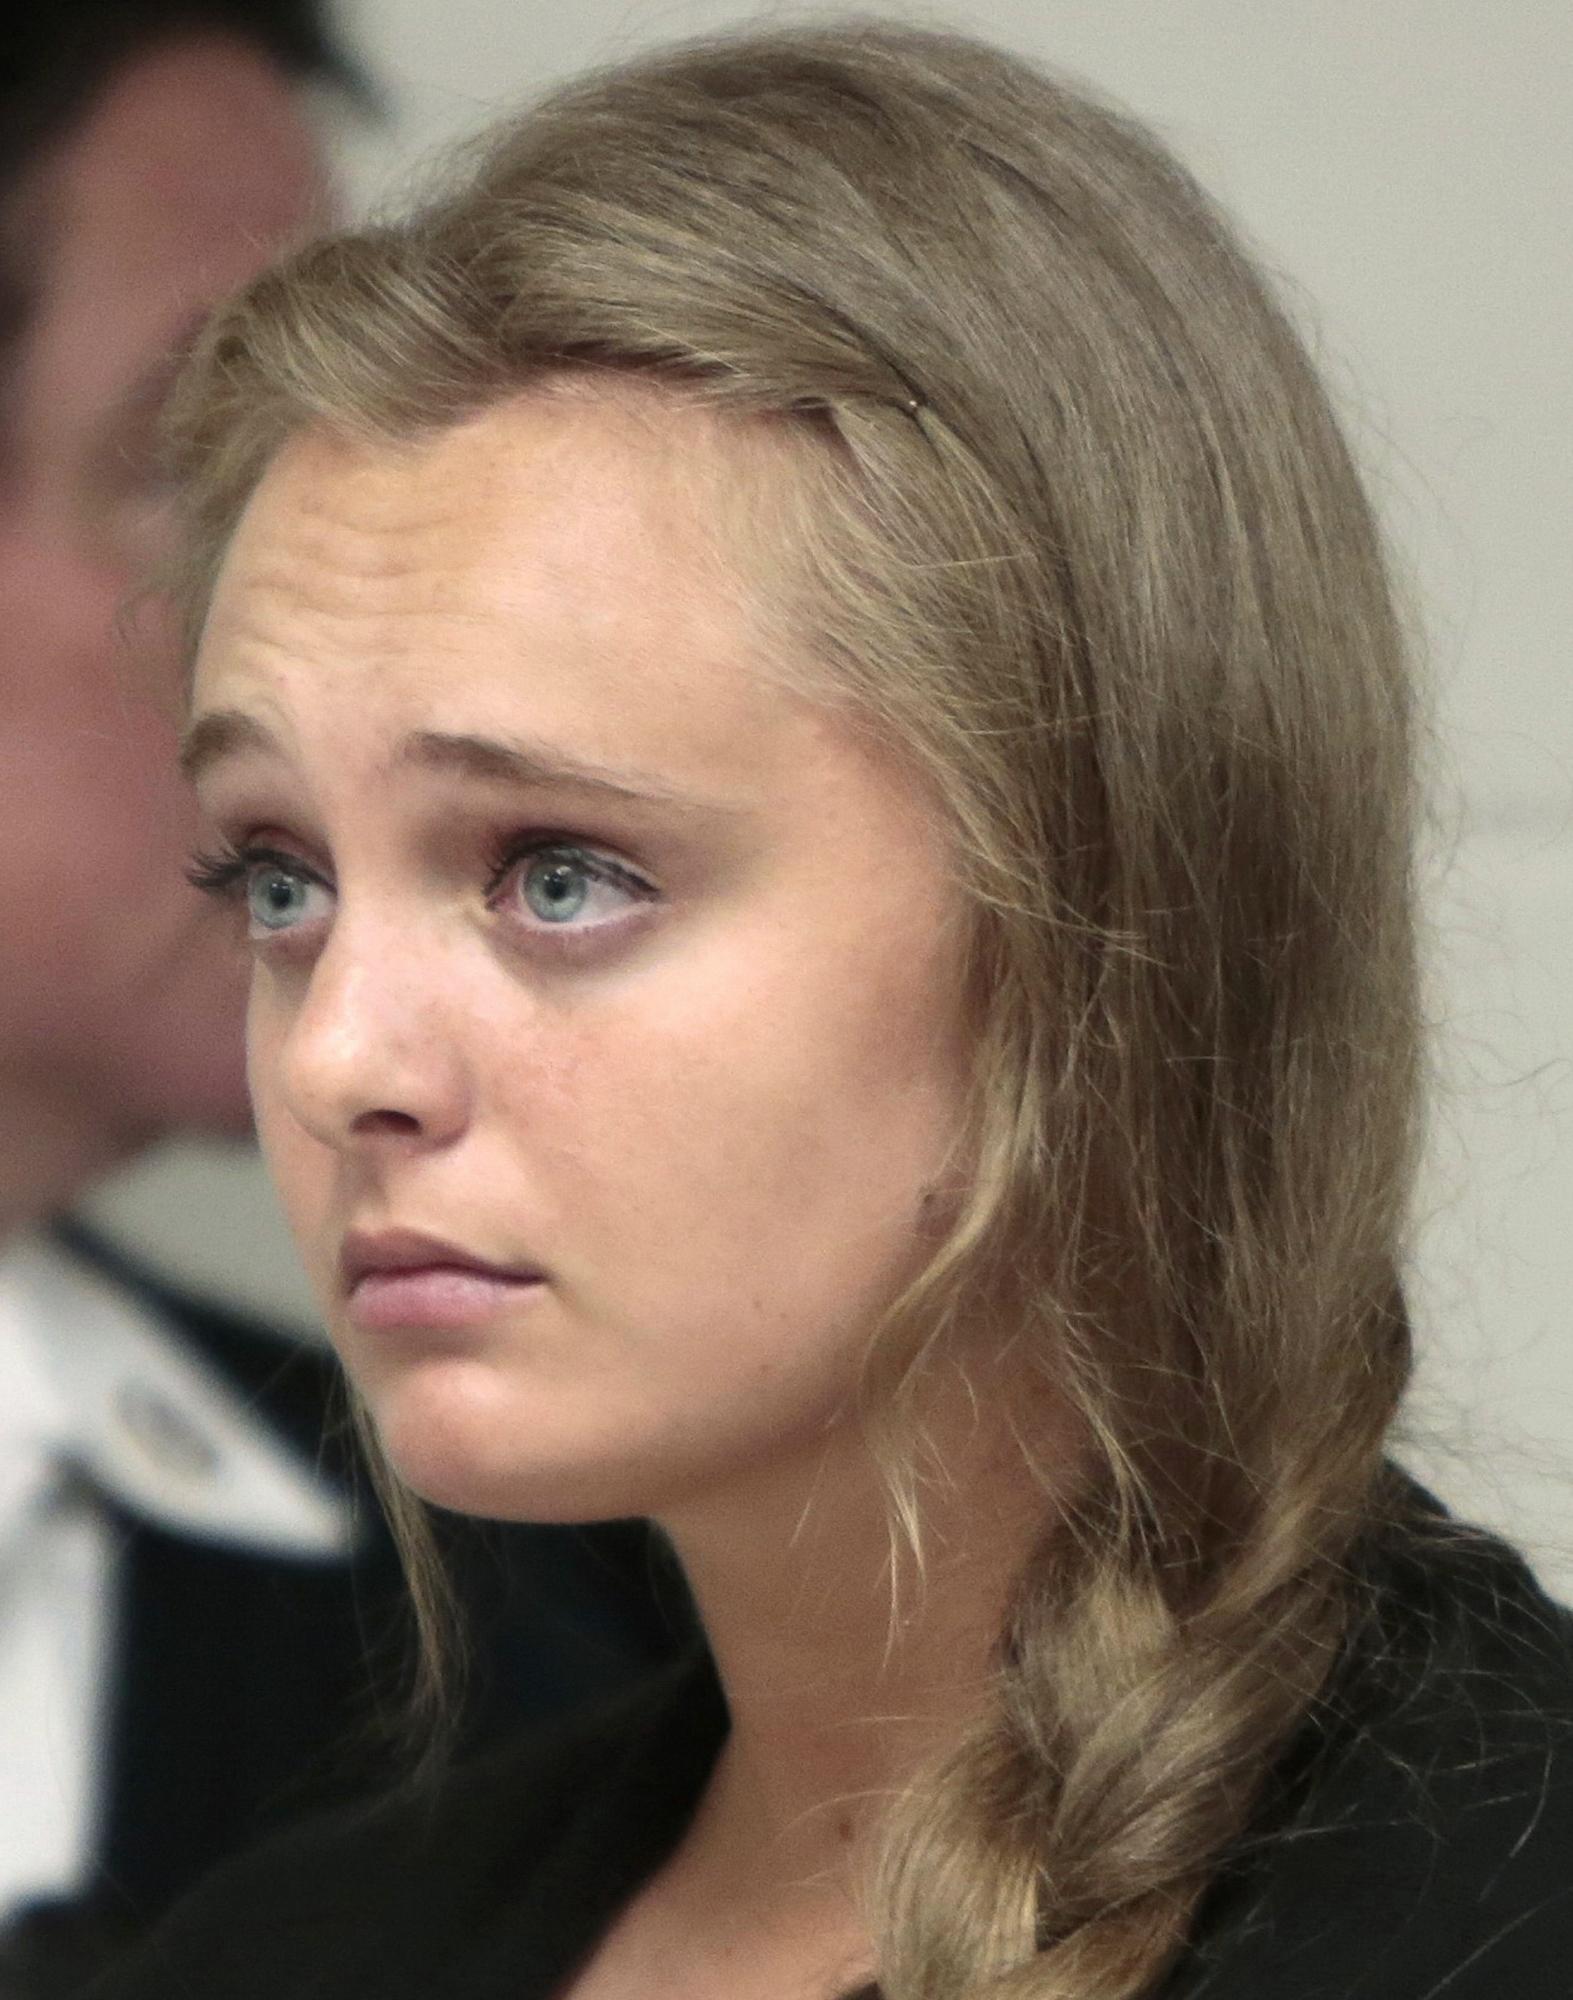 Girl who texted boyfriend urging suicide will face trial | The Spokesman-Review